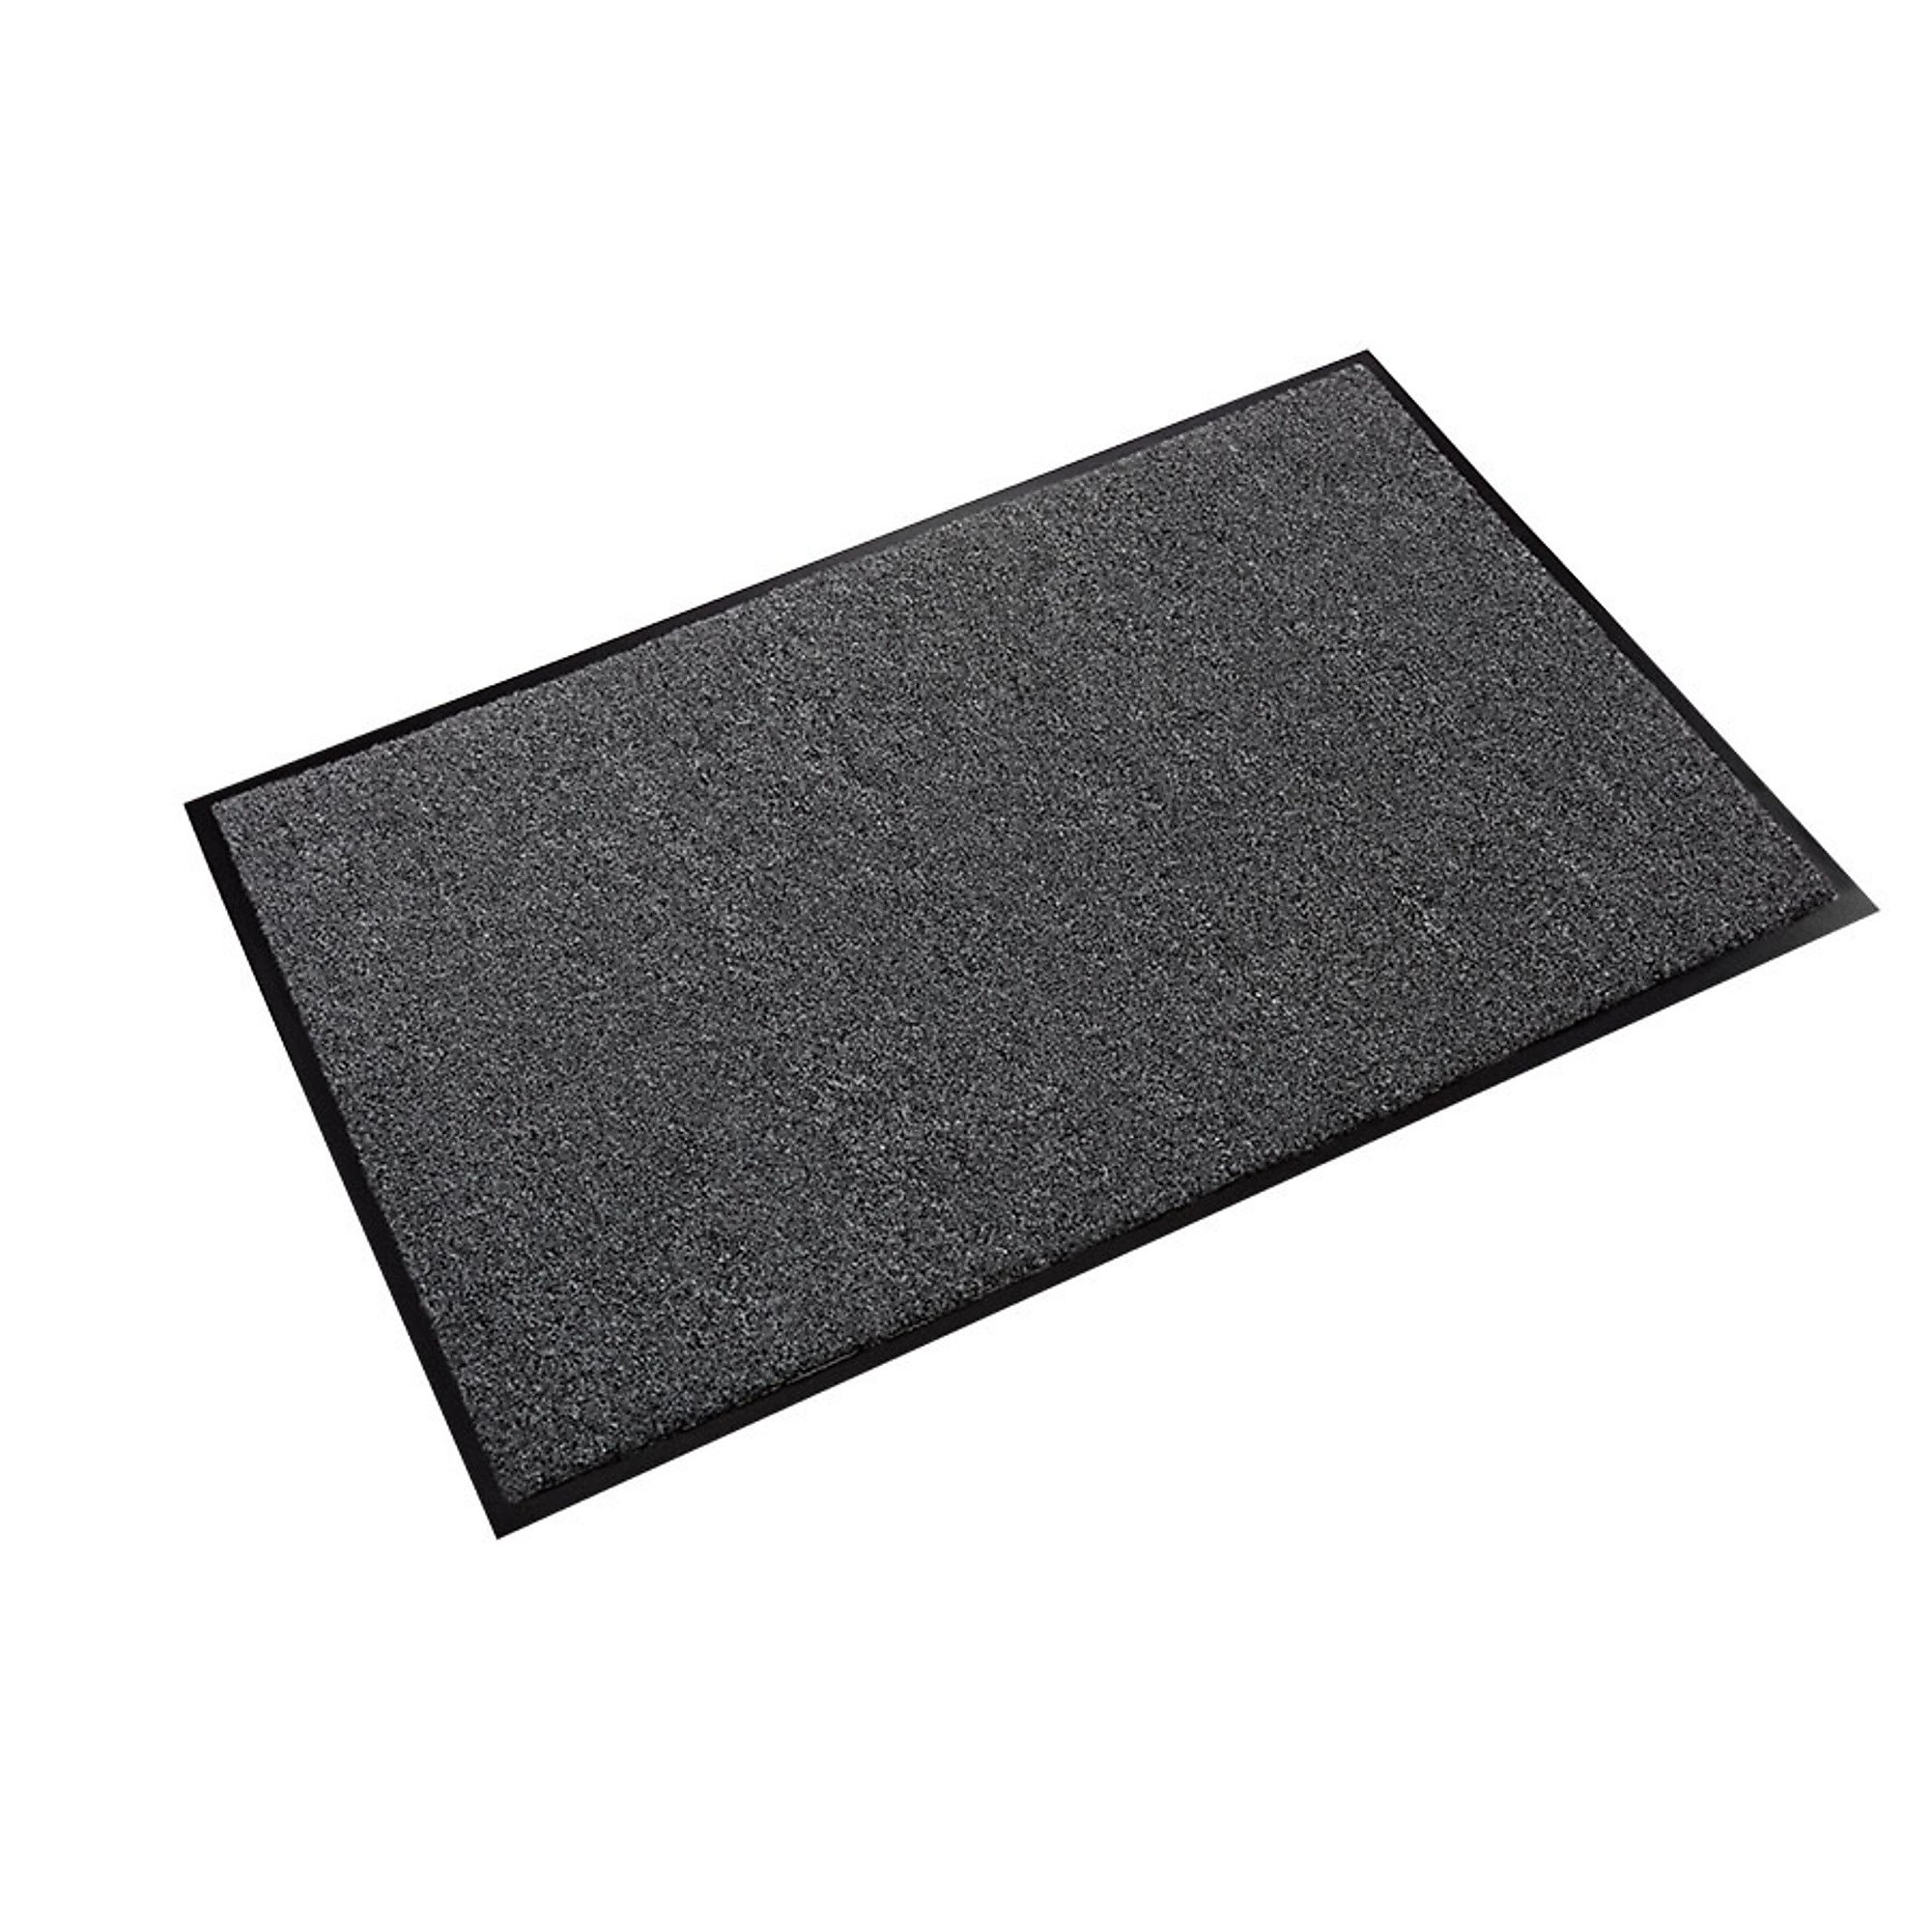 Crown Matting Technologies, Rely-On Olefin 6ft.x60ft. Charcoal, Width 72 in, Length 720 in, Thickness 3/8 in, Model GSR0072CH